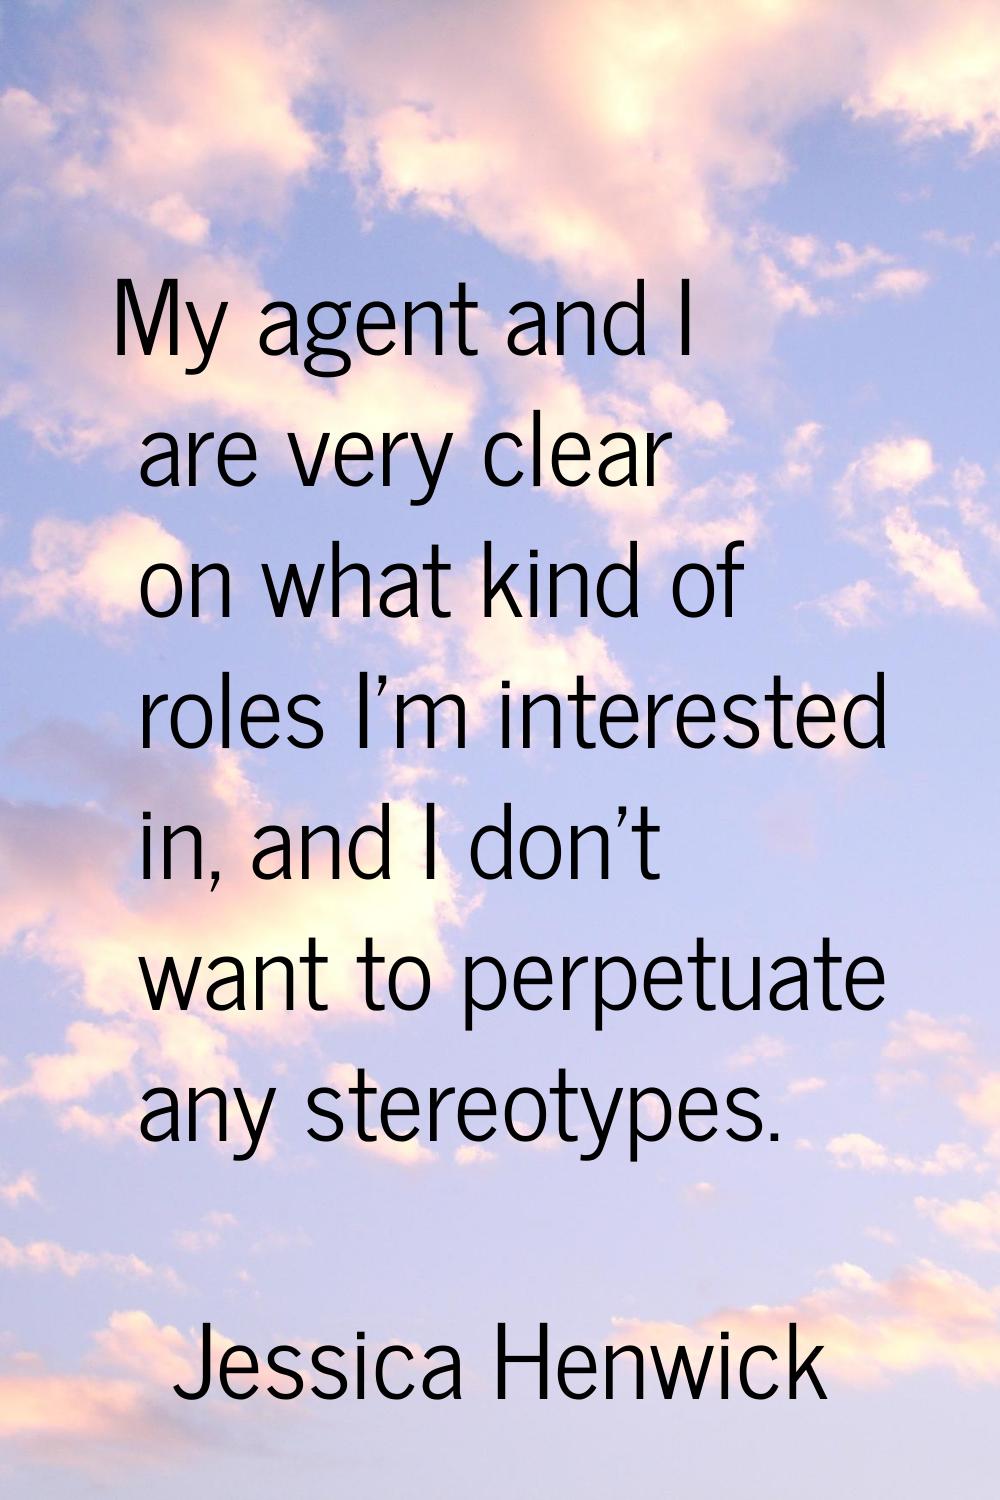 My agent and I are very clear on what kind of roles I'm interested in, and I don't want to perpetua